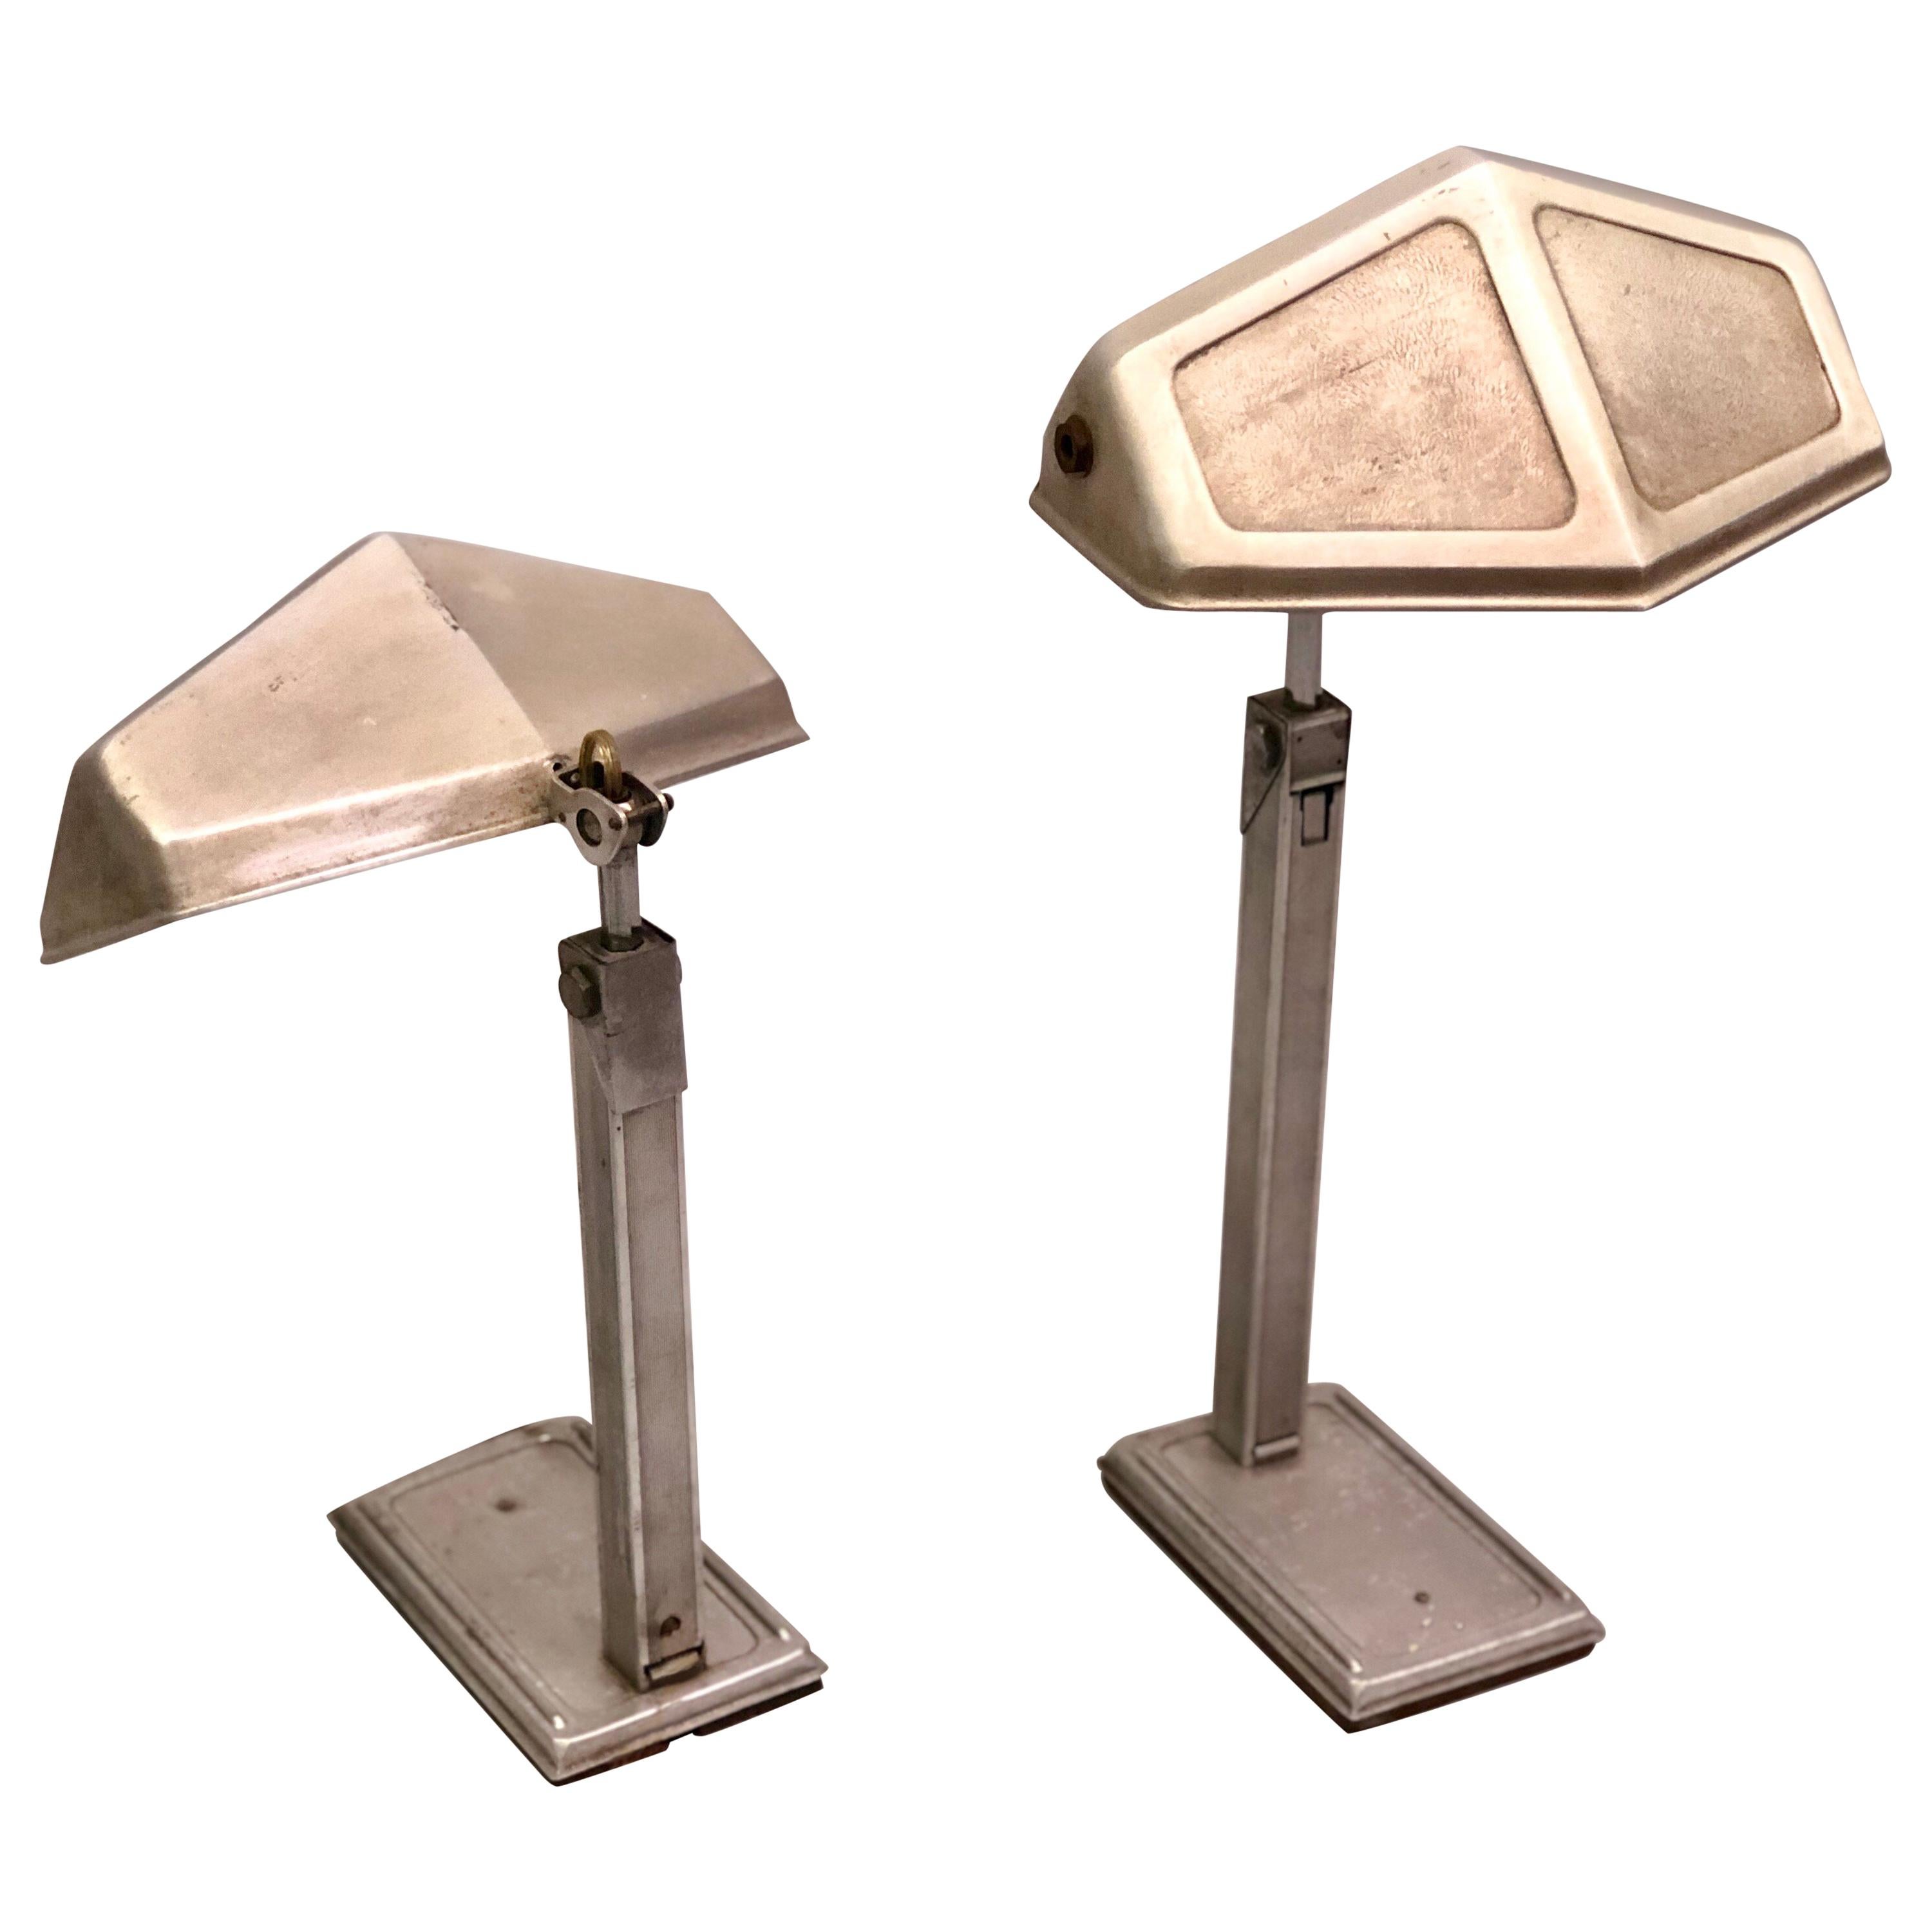 Pair of French Early Modern Adjustable Aluminum Table/Desk Lamps by Pirette 1930